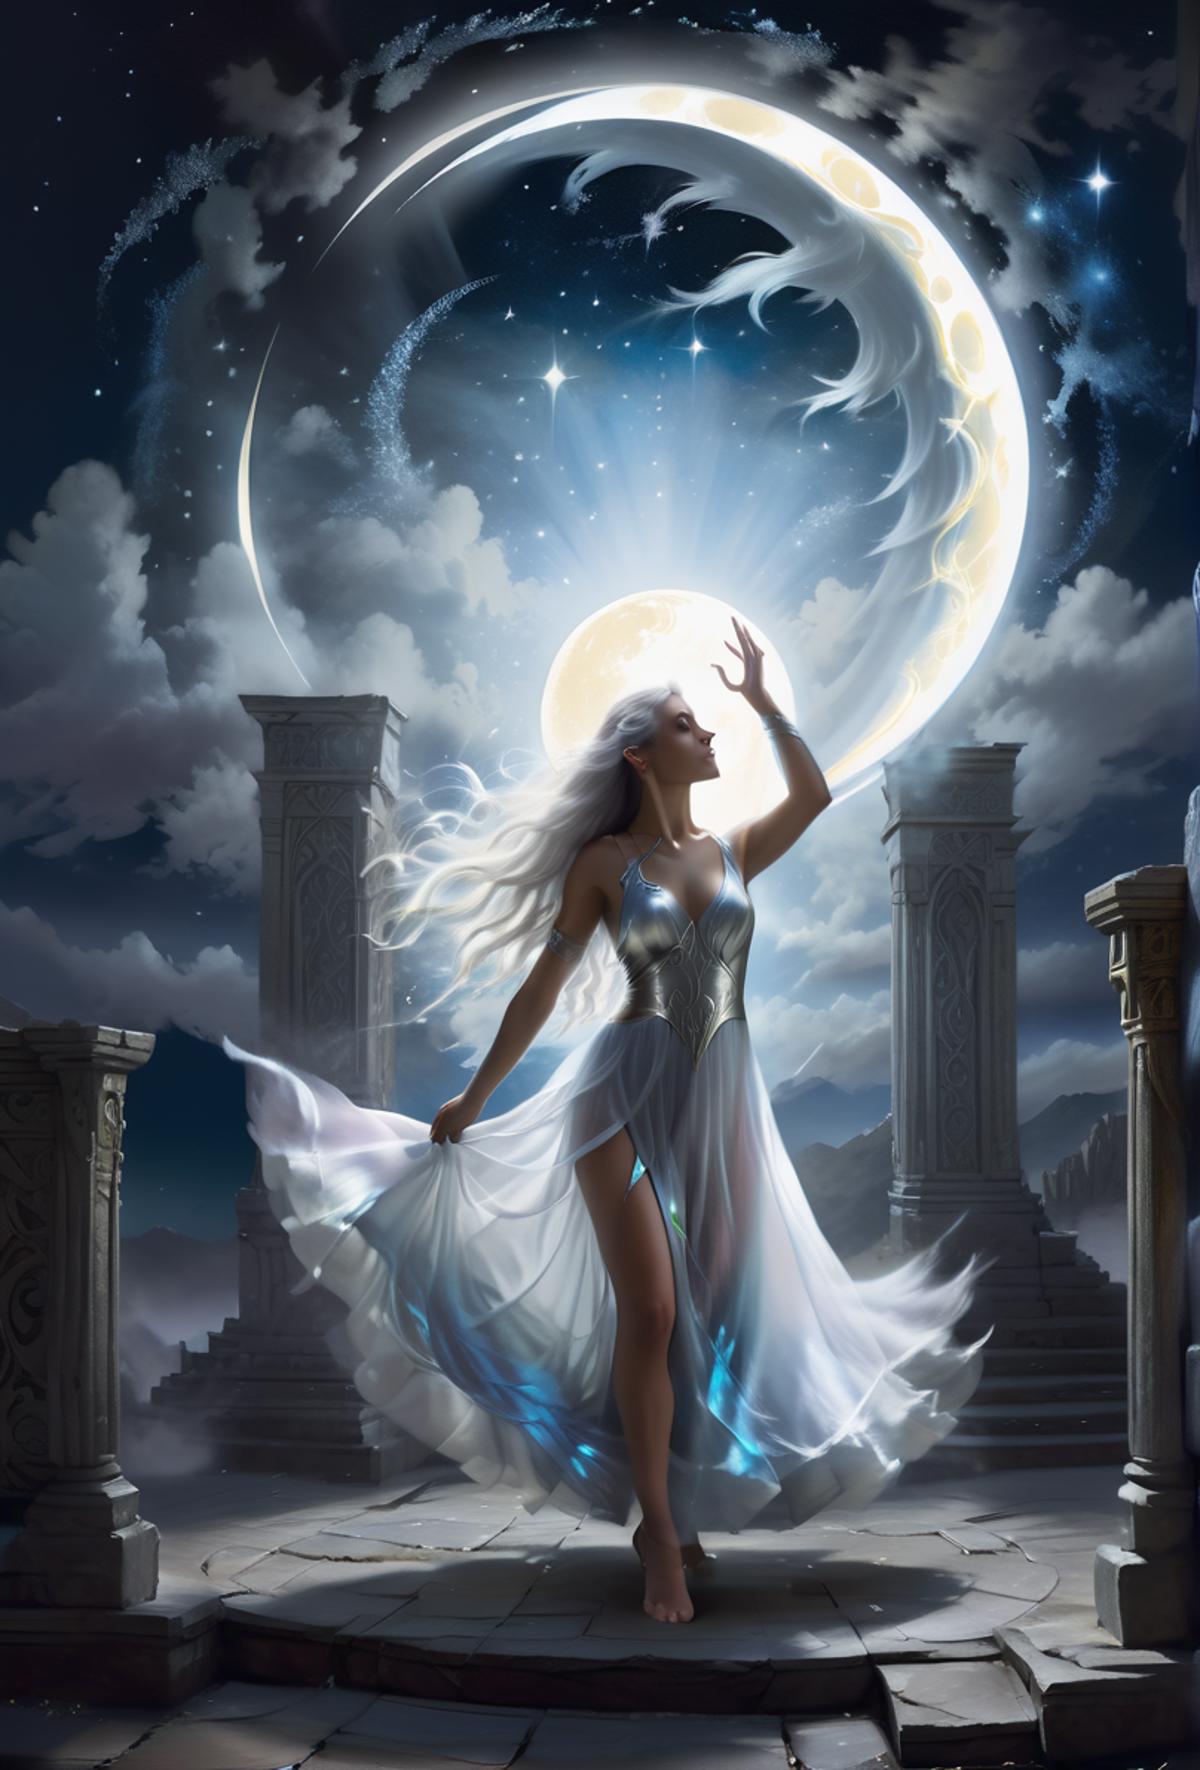 A woman in a white dress, draped in a white veil, stands in front of a full moon.